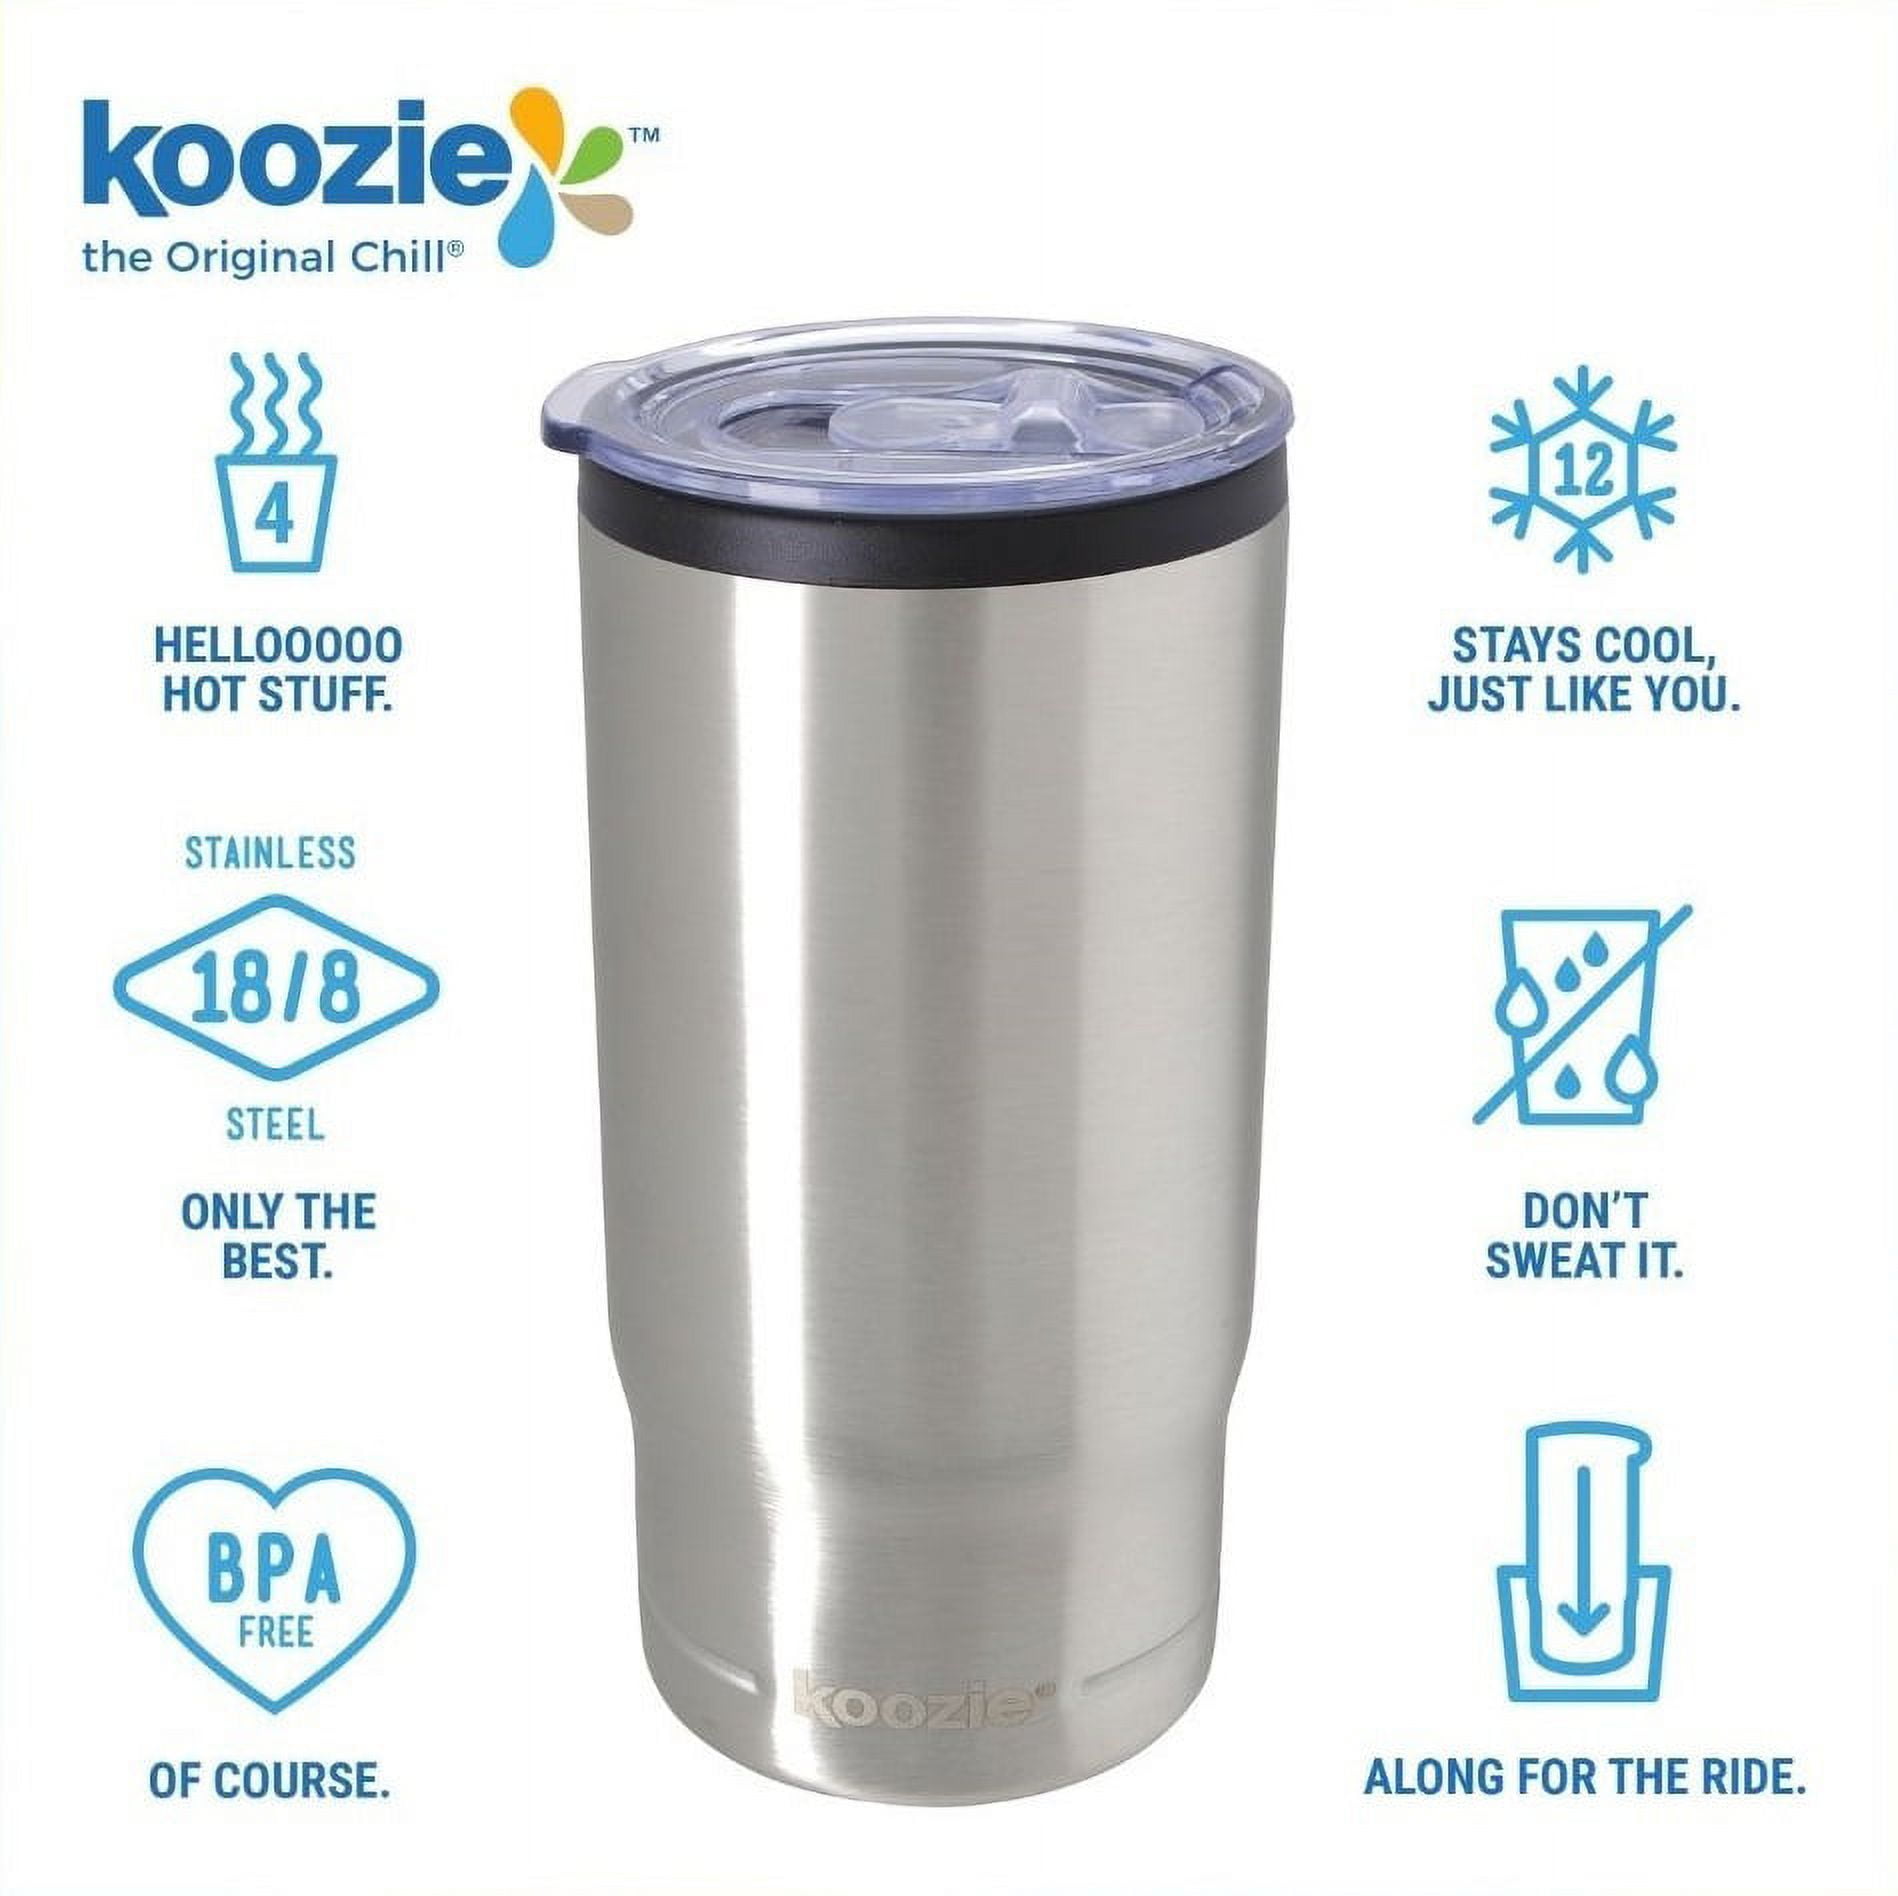 KOOZIE® Stainless Steel Triple 3-in-1 Can Cooler, Bottle or Tumbler with  Lid for 16 oz Tall Boy Cans, Double Wall Vacuum Insulated for Hot and Cold